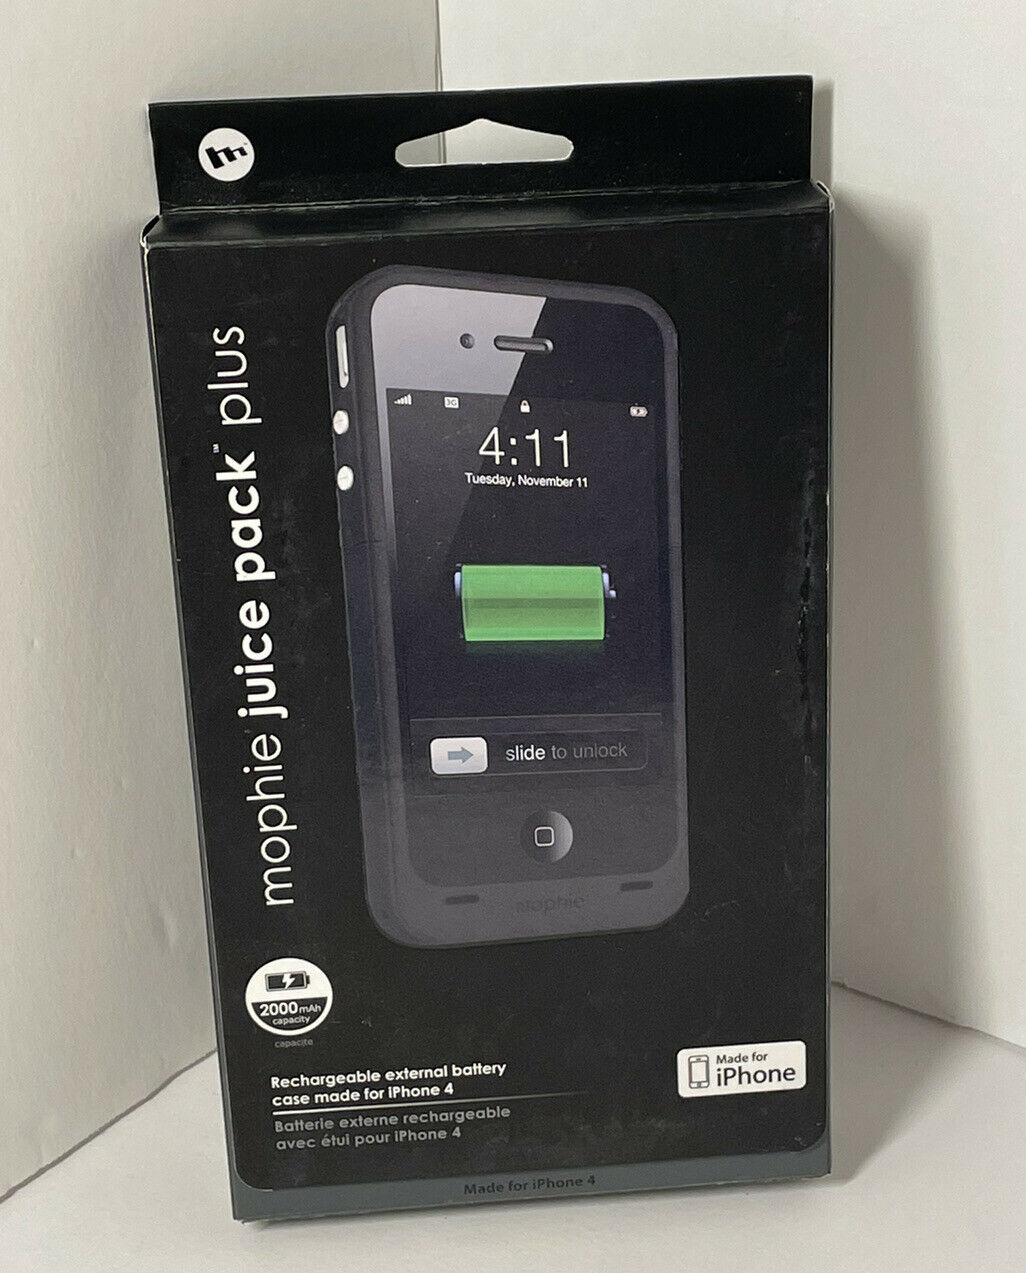 Mophie new open box charging juice pack plus case for iphone 4 - $23.38